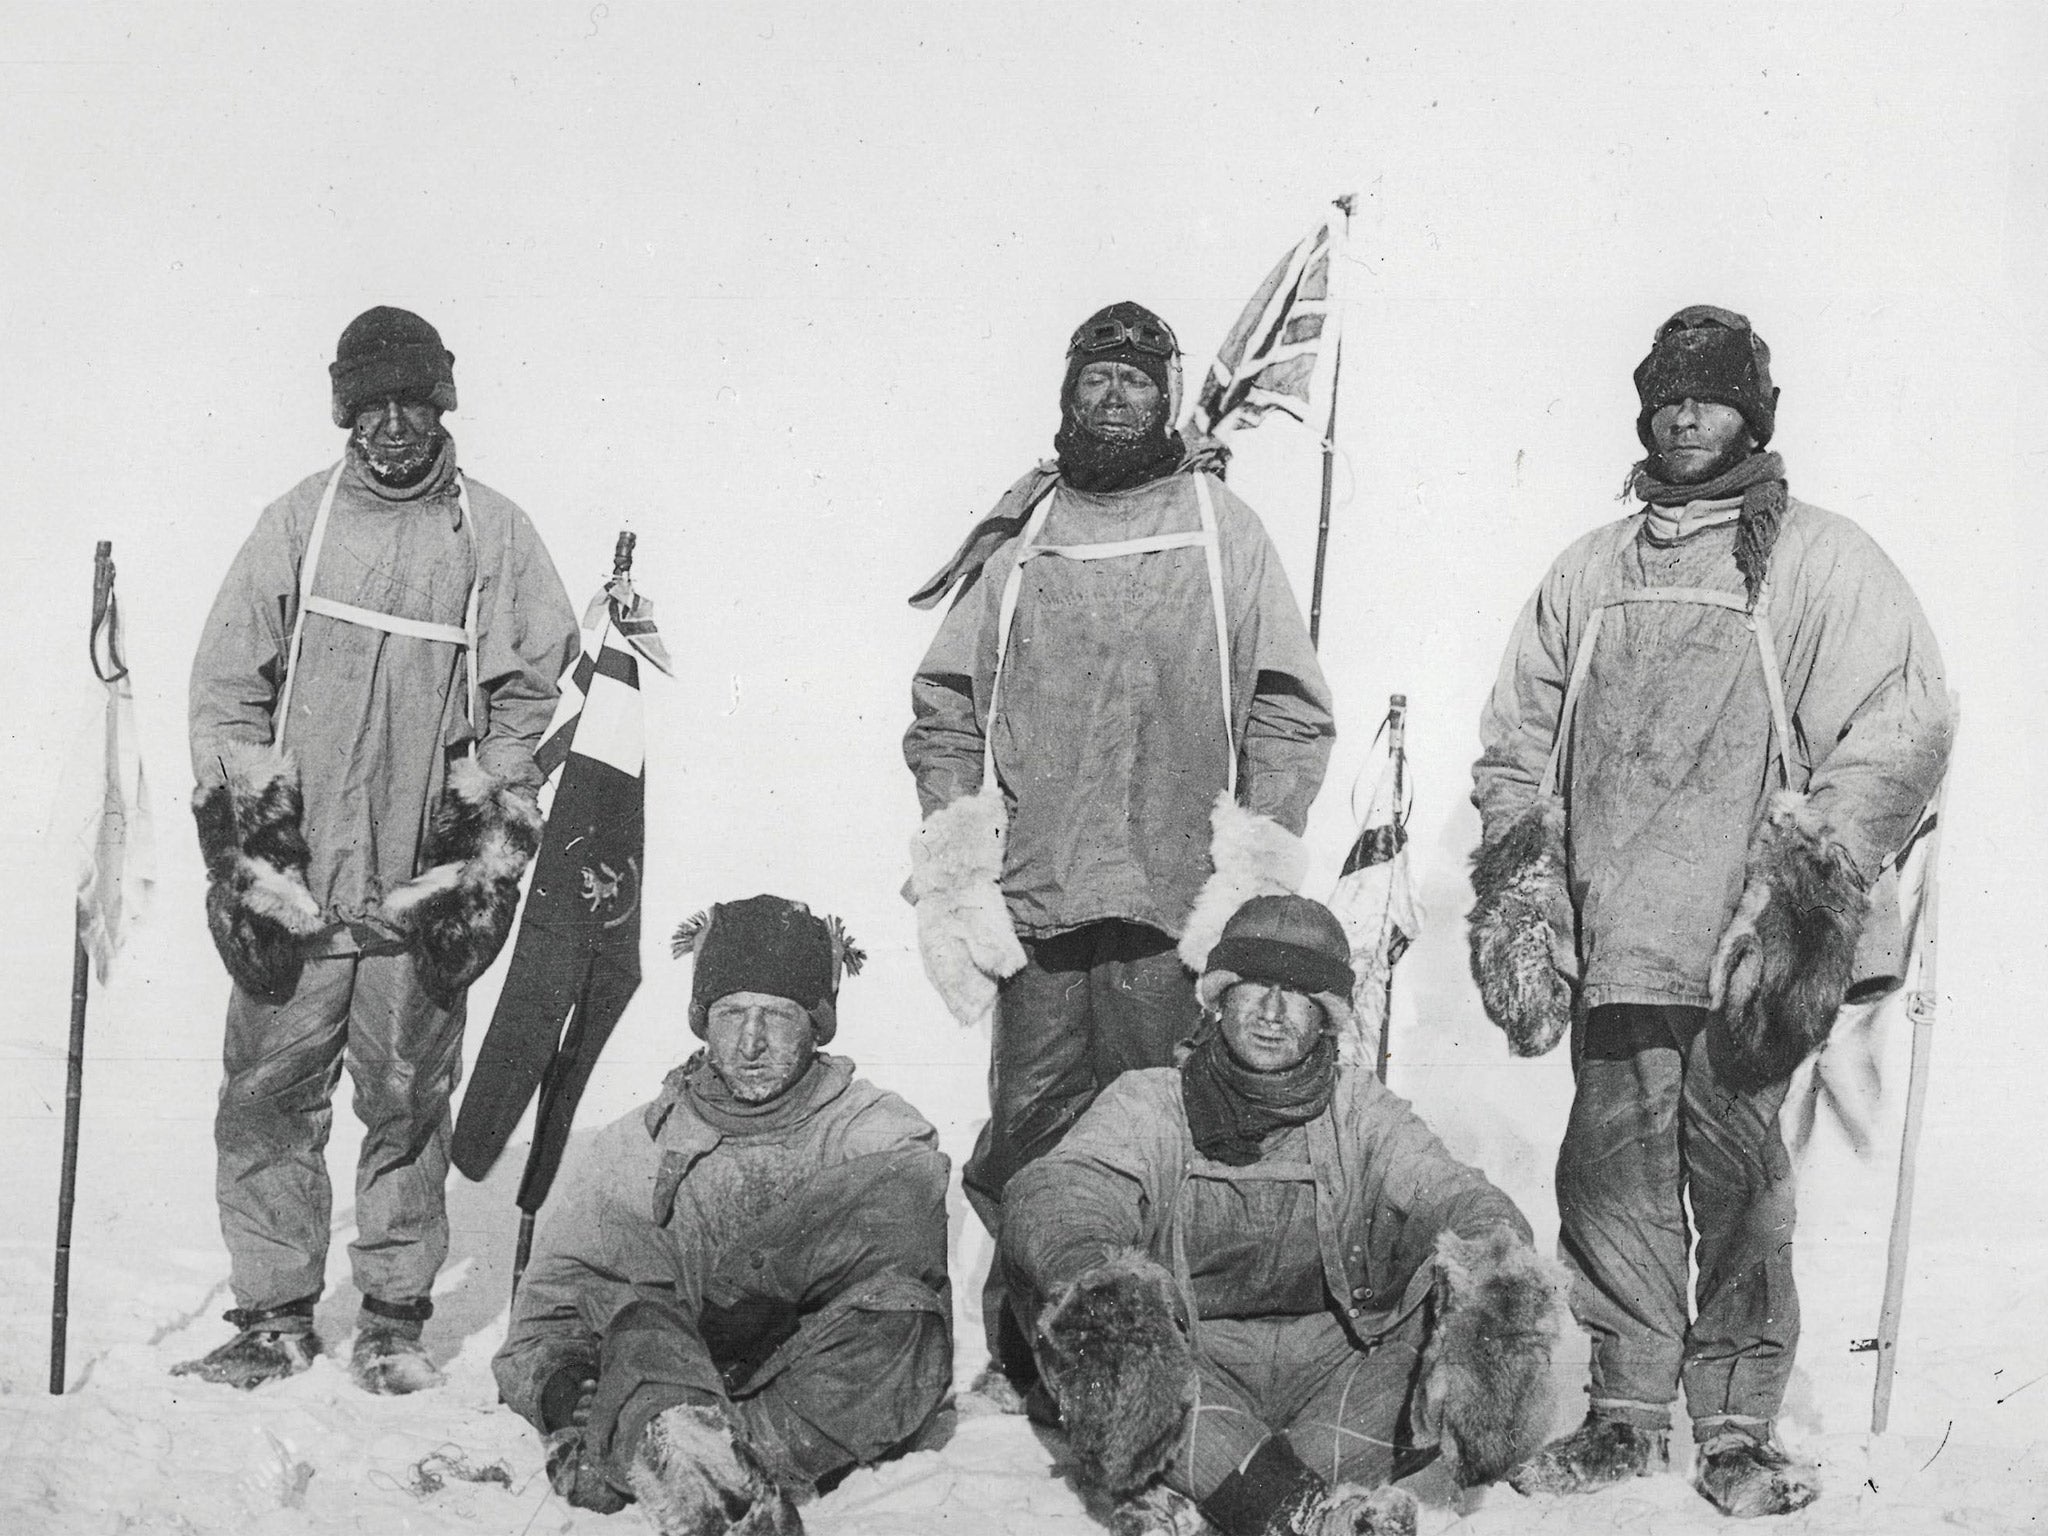 Risky ramble: members of the British Antarctic expedition in 1911